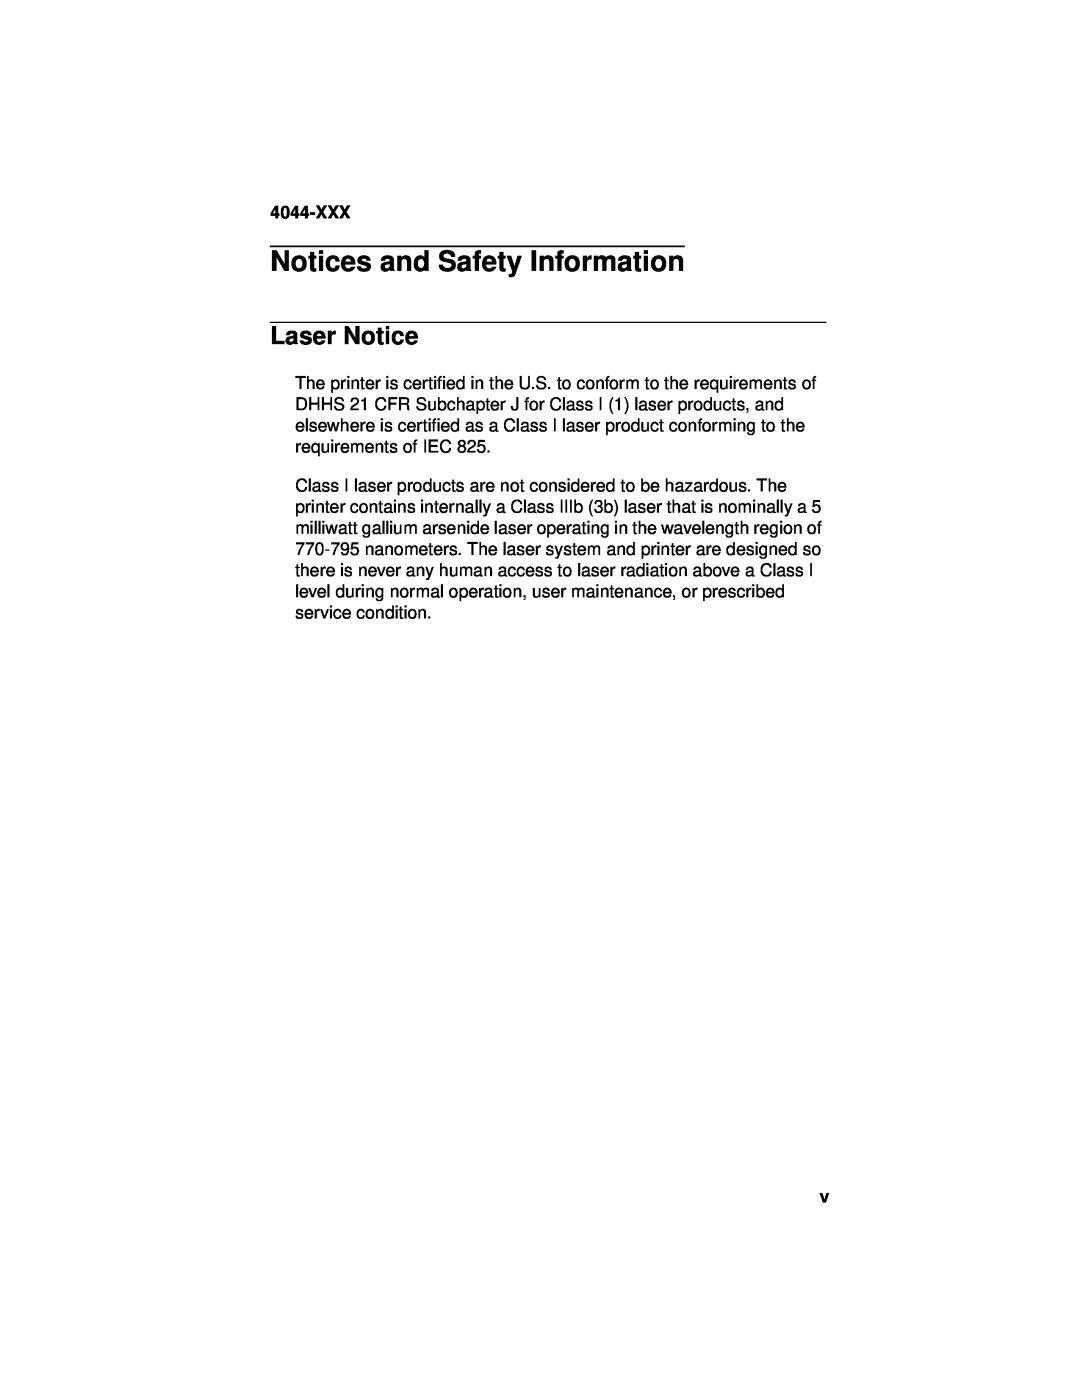 Lexmark E310 manual Notices and Safety Information, Laser Notice, 4044-XXX 